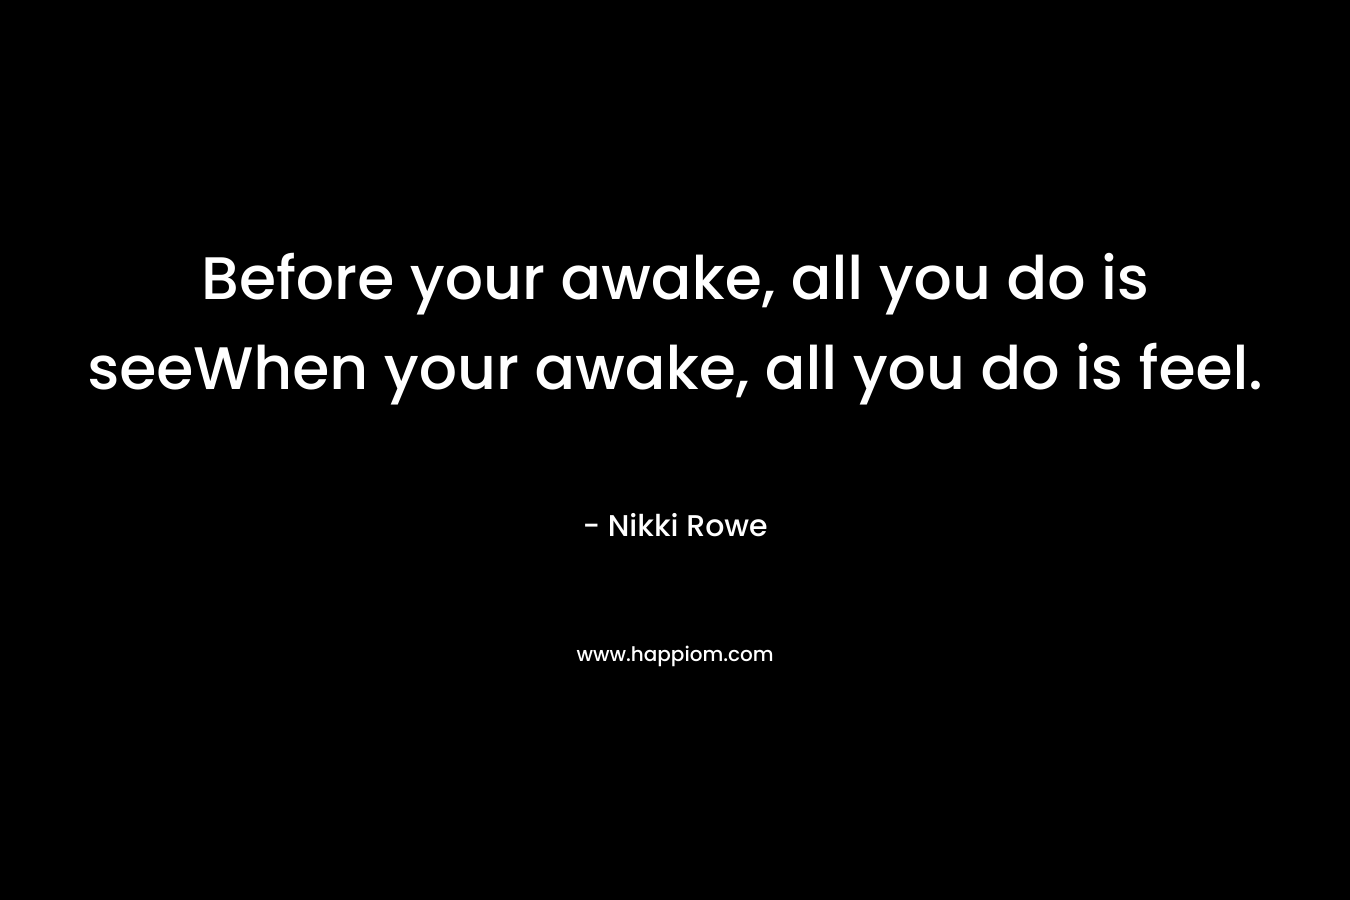 Before your awake, all you do is seeWhen your awake, all you do is feel.